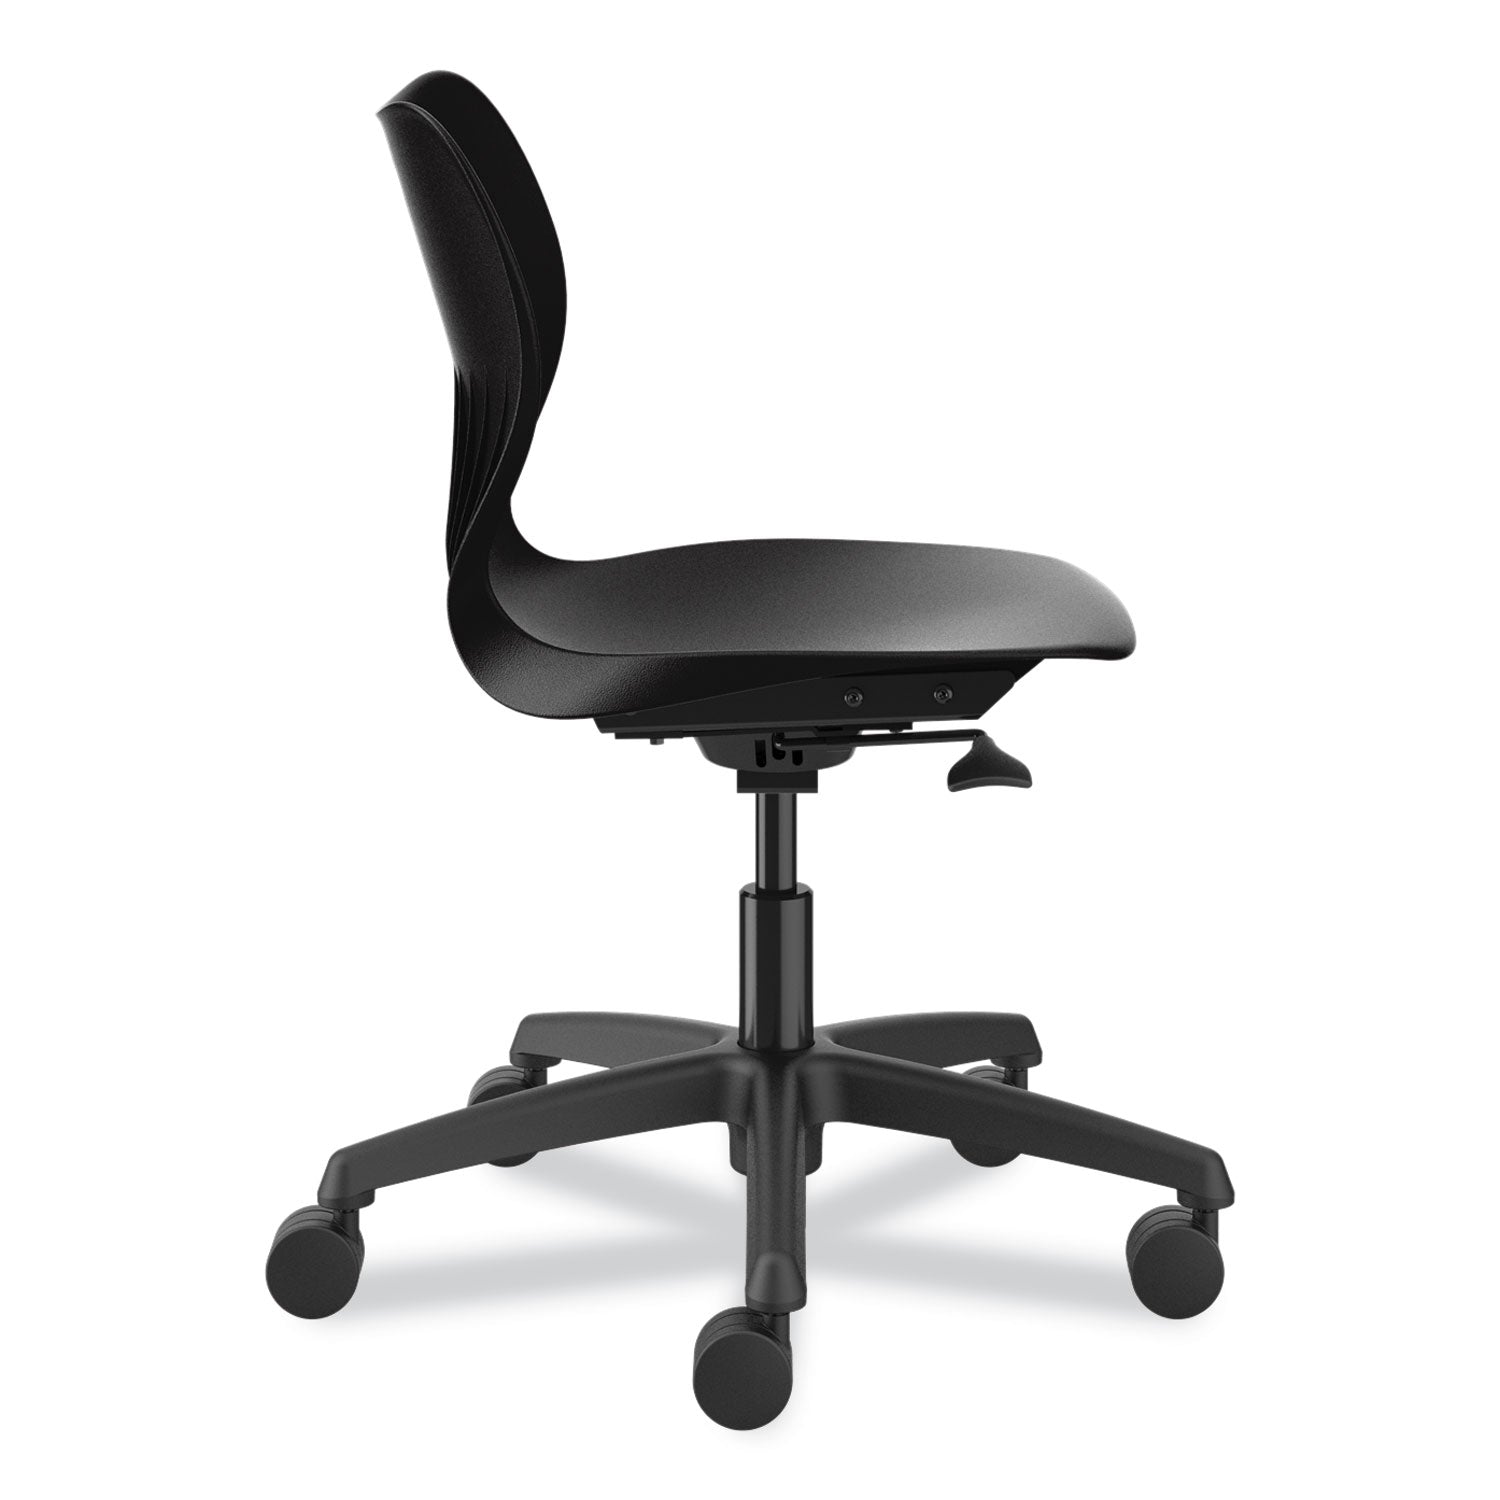 smartlink-task-chair-supports-up-to-275-lb-3475-seat-height-onyx-seat-back-black-base-ships-in-7-10-business-days_honsstk18bhlon - 2